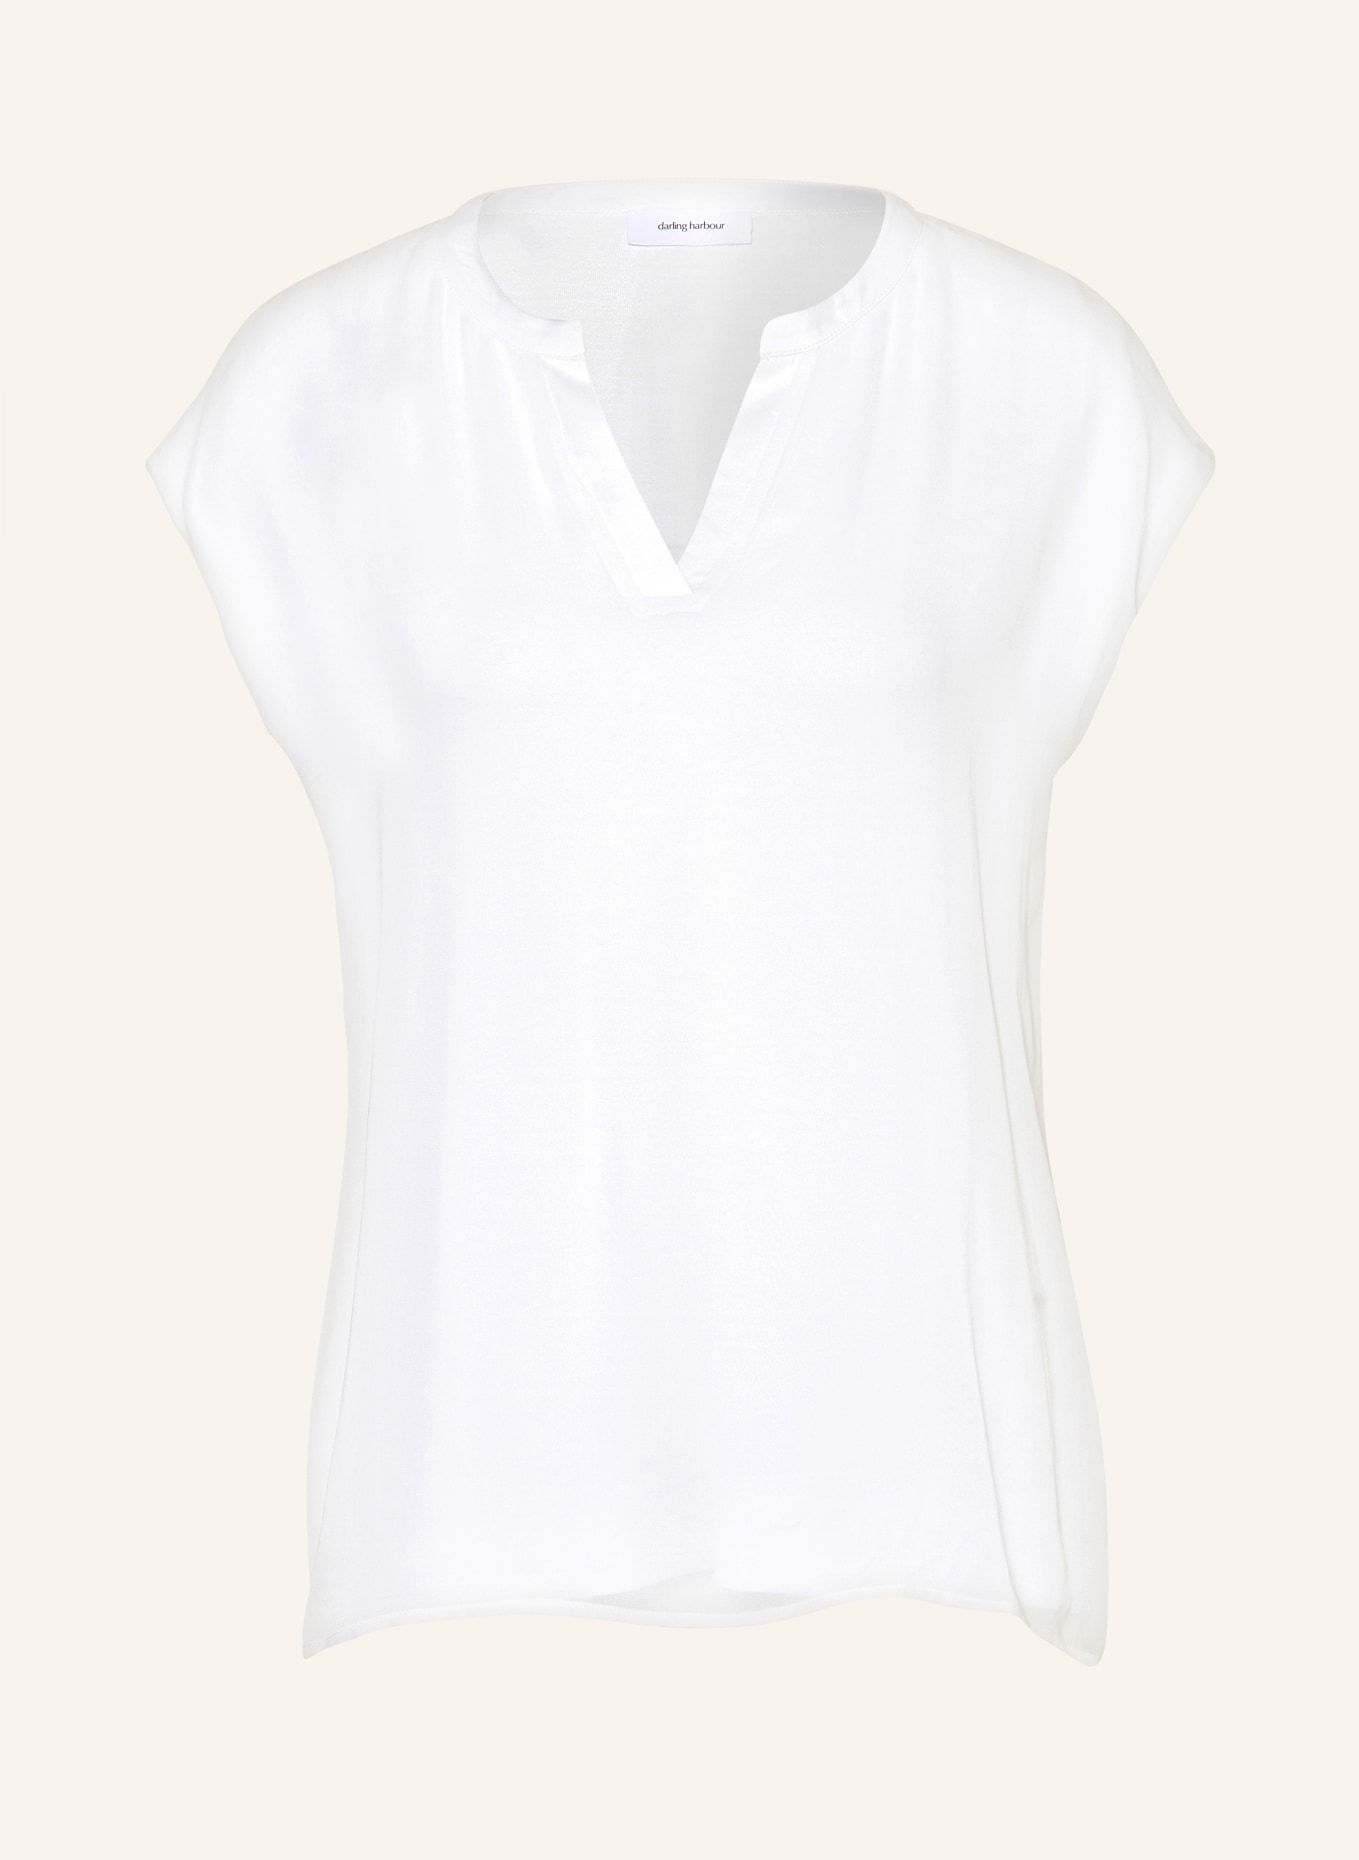 darling harbour Blouse top, Color: WEISS WEISS (Image 1)